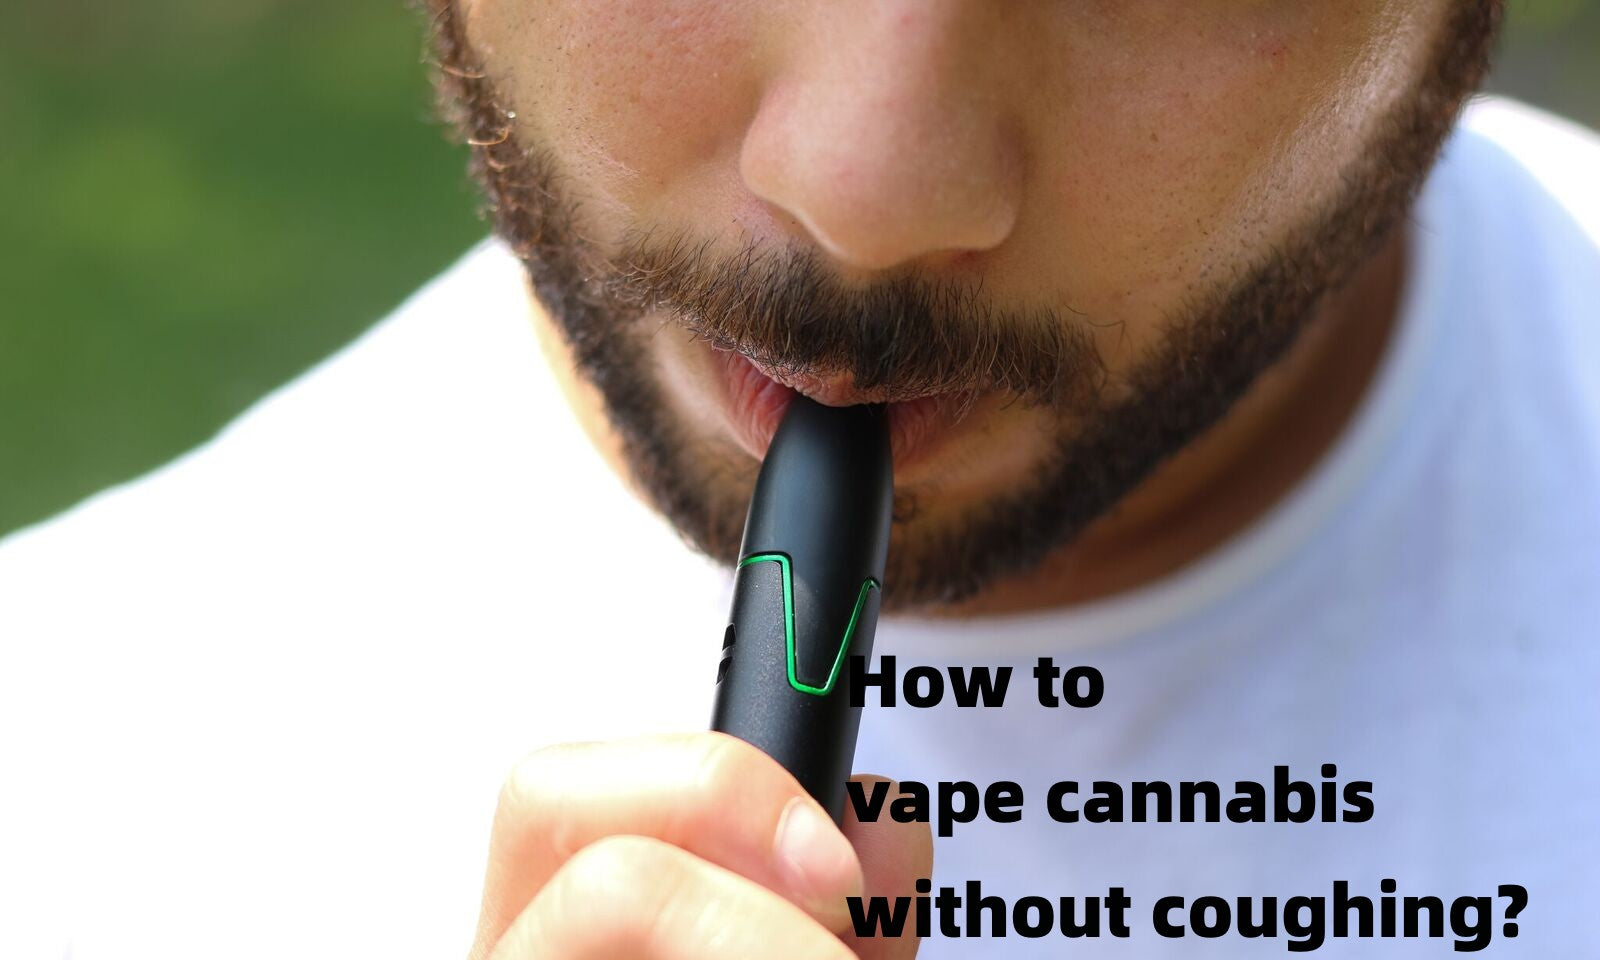 How to vape weed